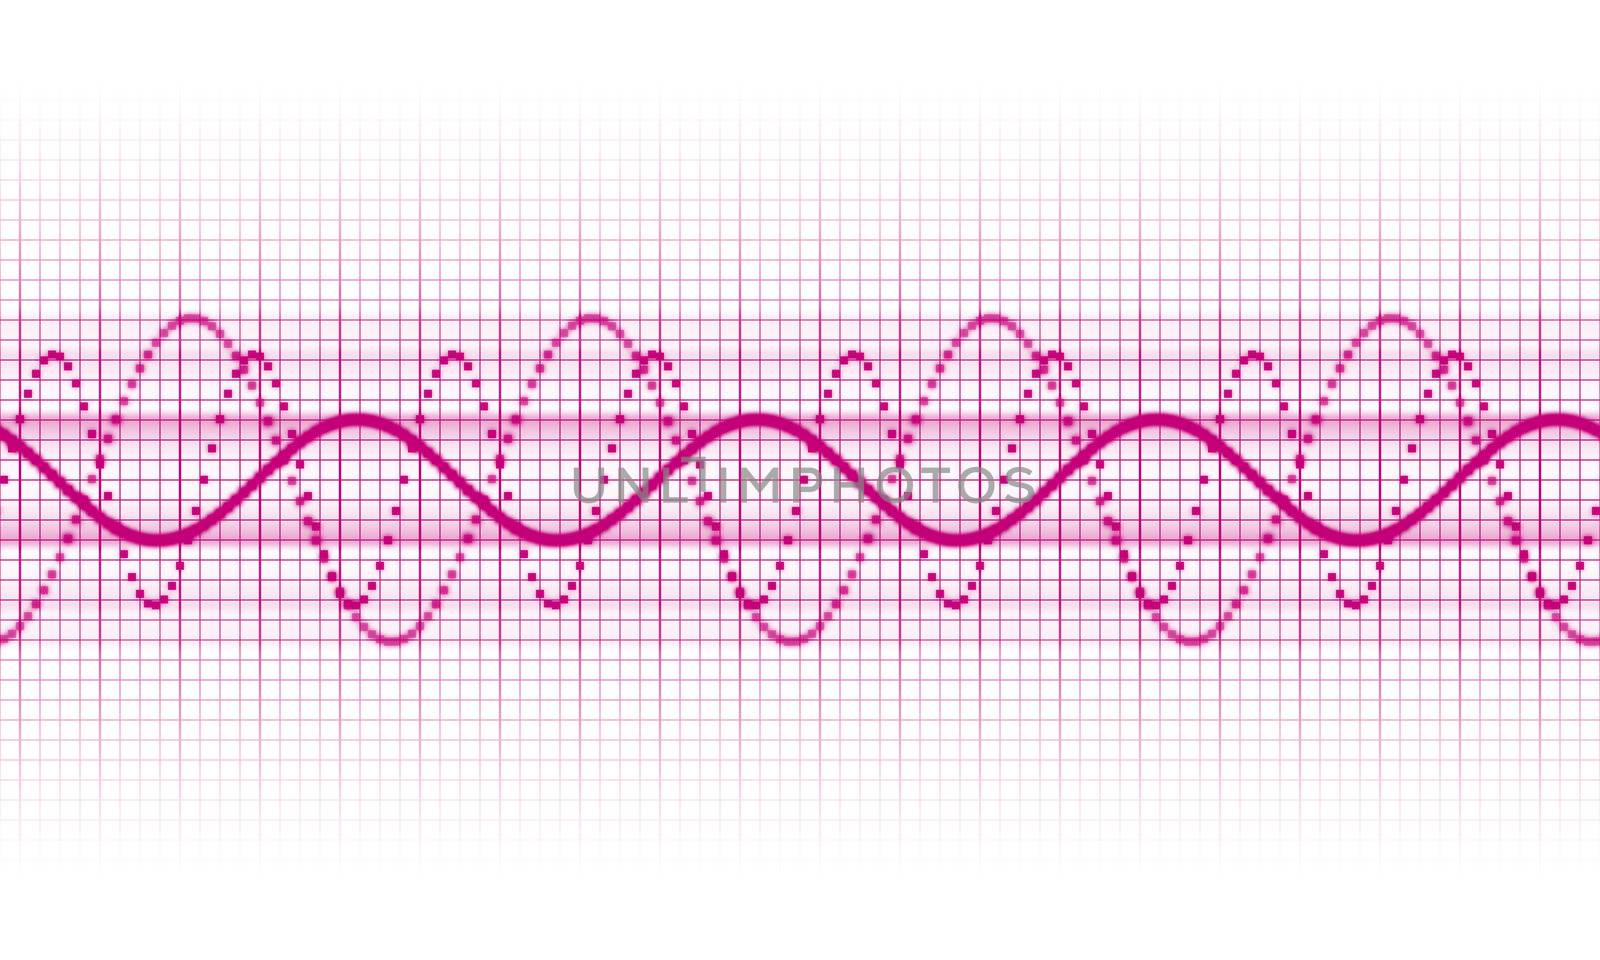 a pink sound wave on white background